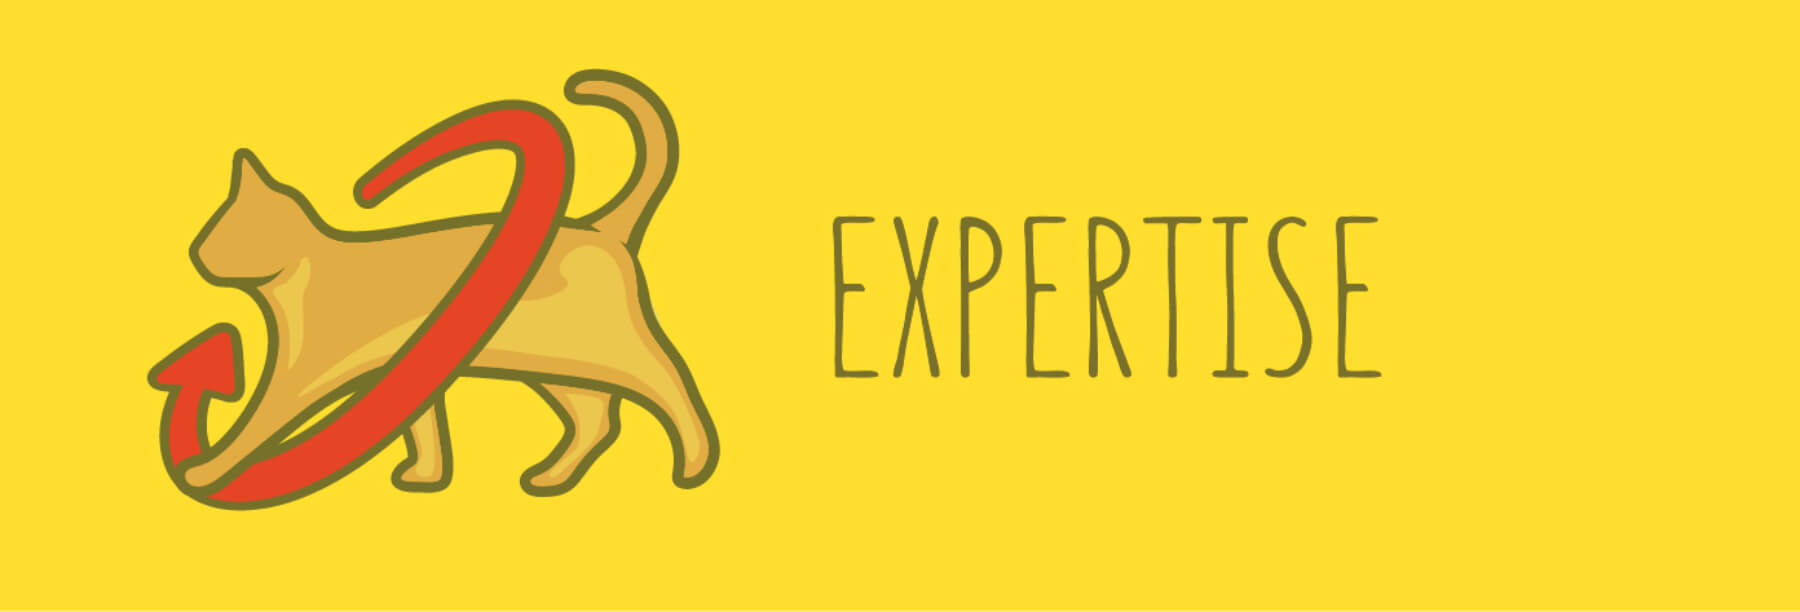 Expertise Friskies chat